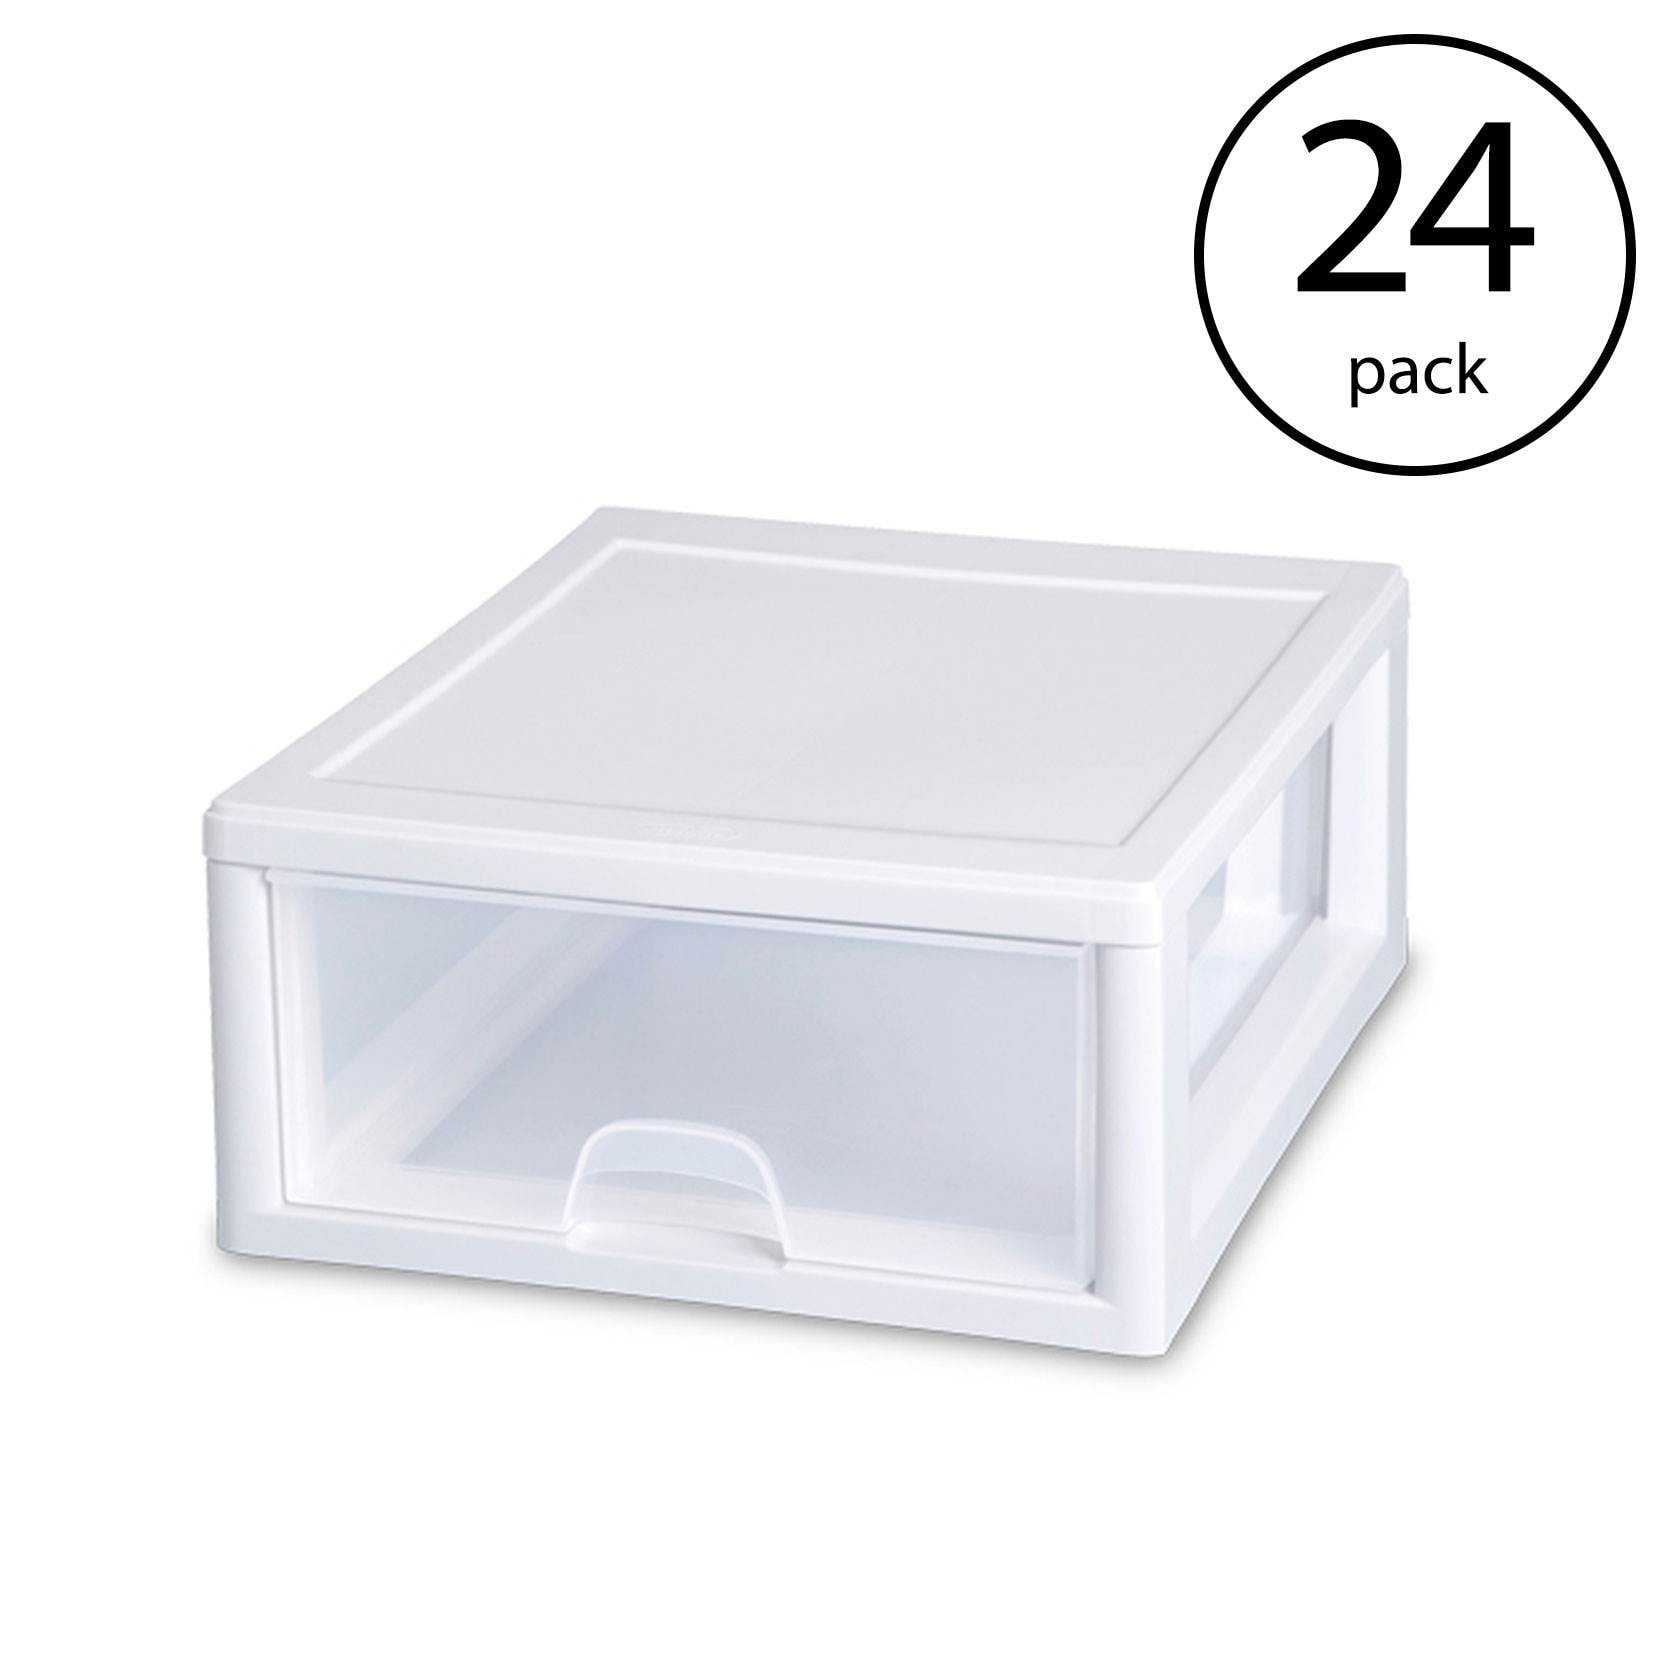 Sterilite 16 Quart Stacking Storage Box Container Tub w/Lid, Clear